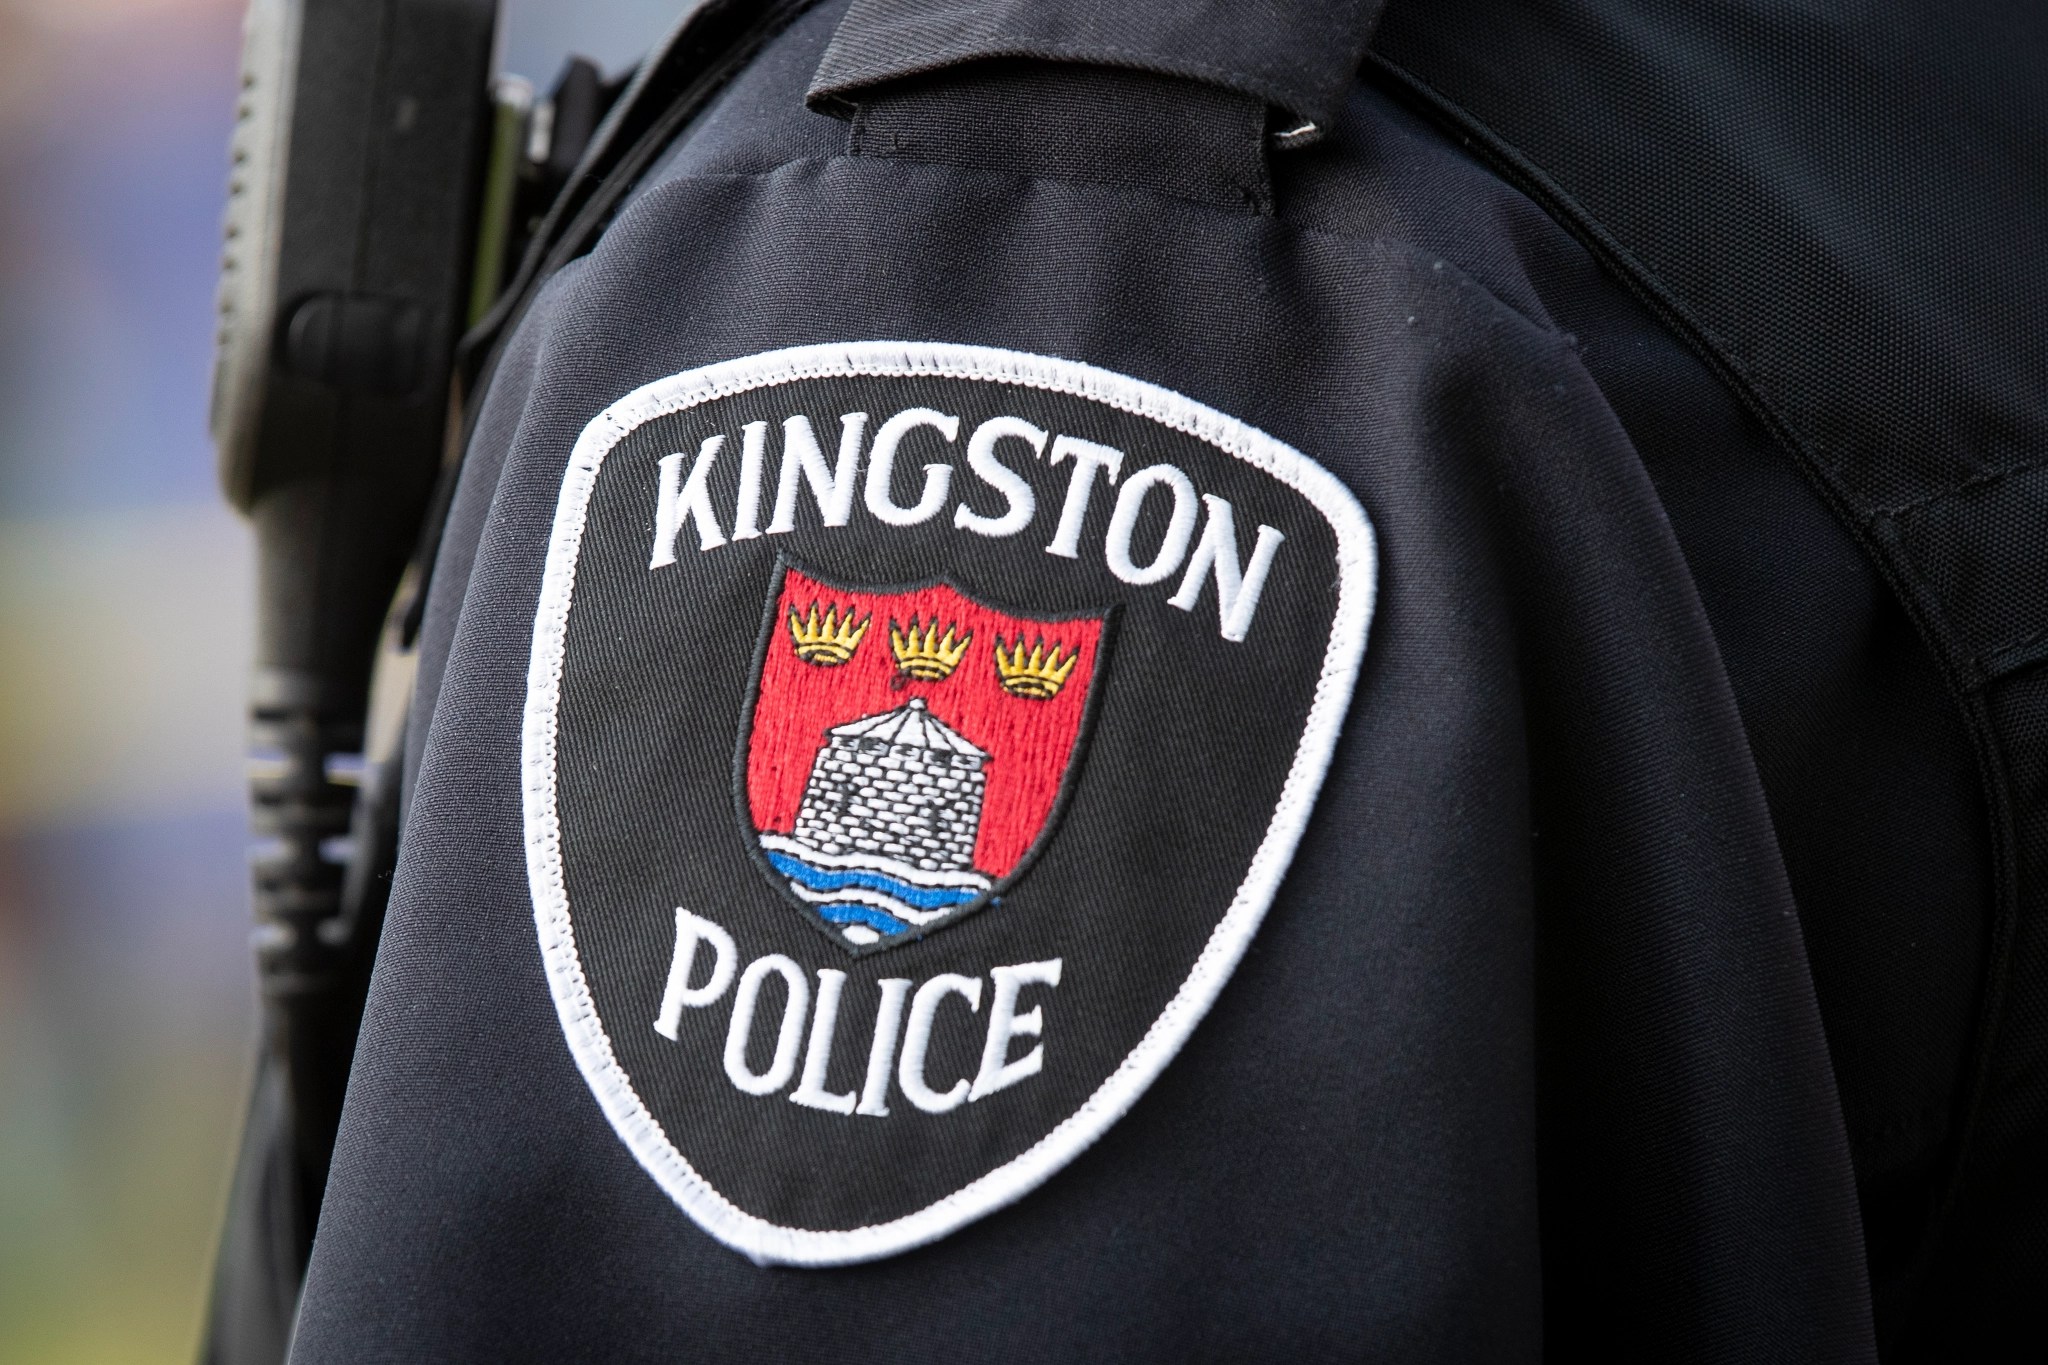 Accused shoplifter charged hours after release from arrest: Kingston
police